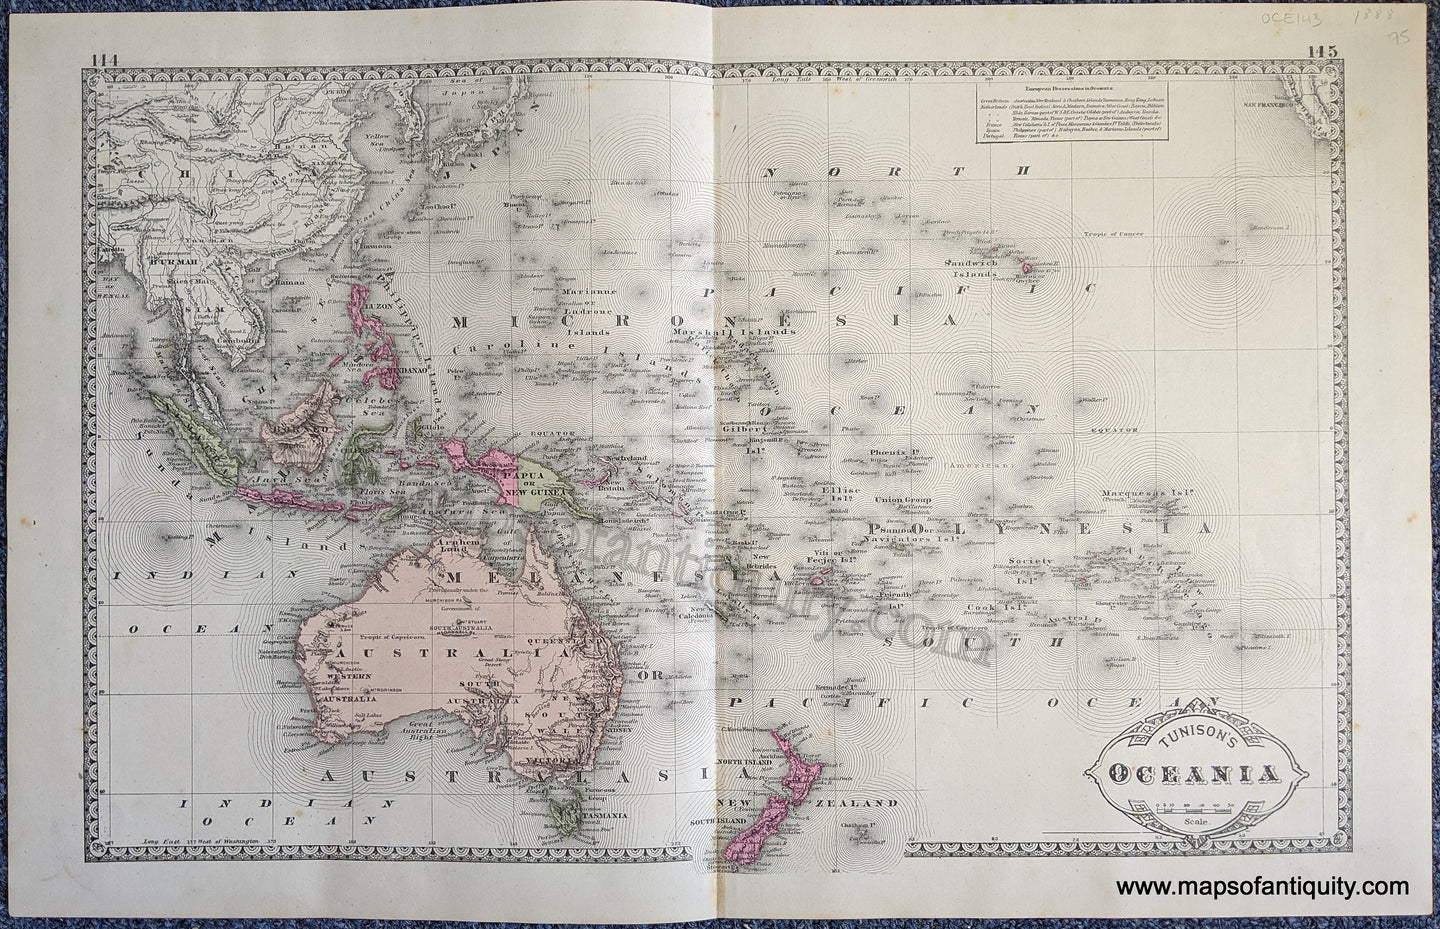 Antique-Print-Double-sided-sheet-with-multiple-maps:-Centerfold---Tunison's-Oceania-;-versos:-Tunison's-Algeria-Tunis-and-Marocco-/-Tunison's-Australia-Oceania--1888-Tunison-Maps-Of-Antiquity-1800s-19th-century